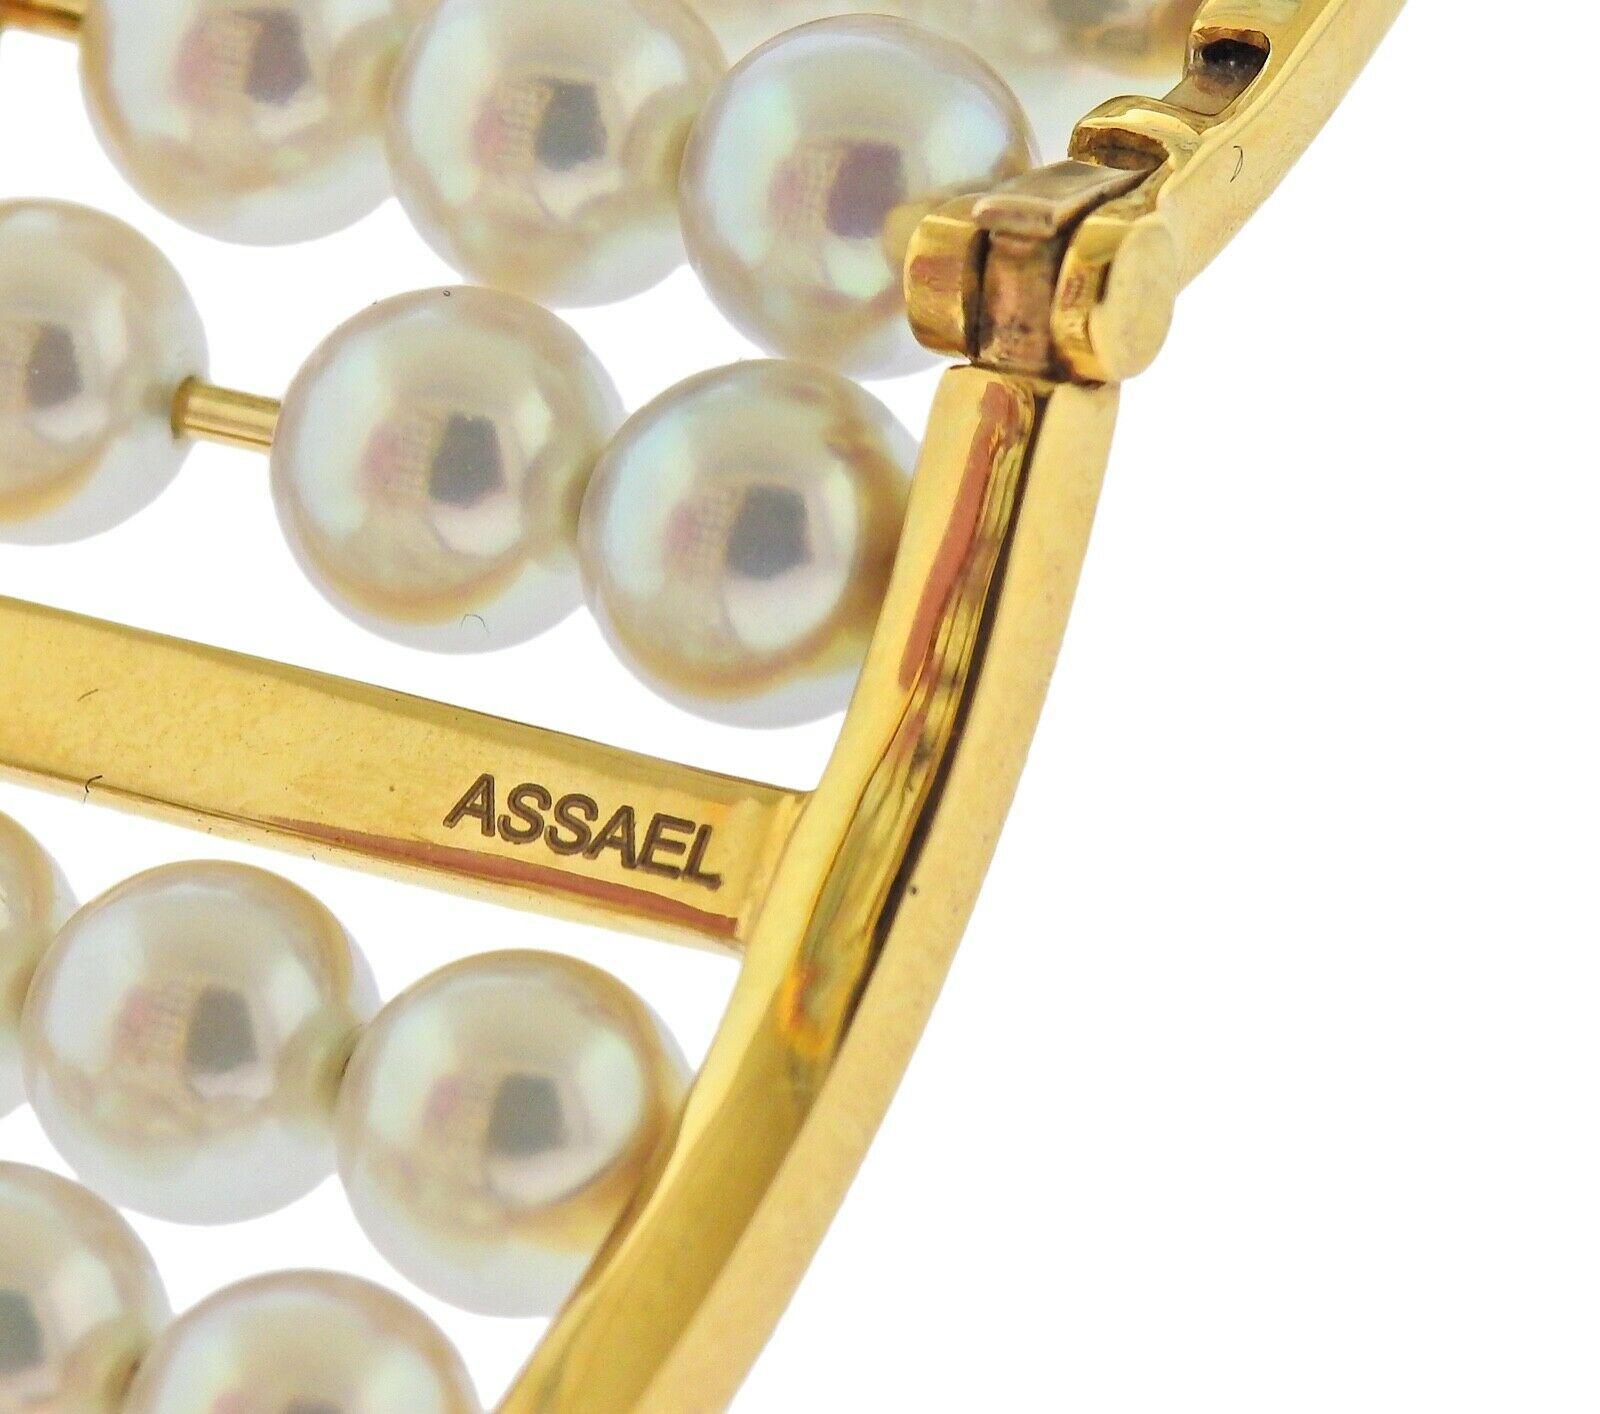 18k yellow gold bangle bracelet by Assael, set with 8mm akoya pearls. Bracelet will fit approx. 7